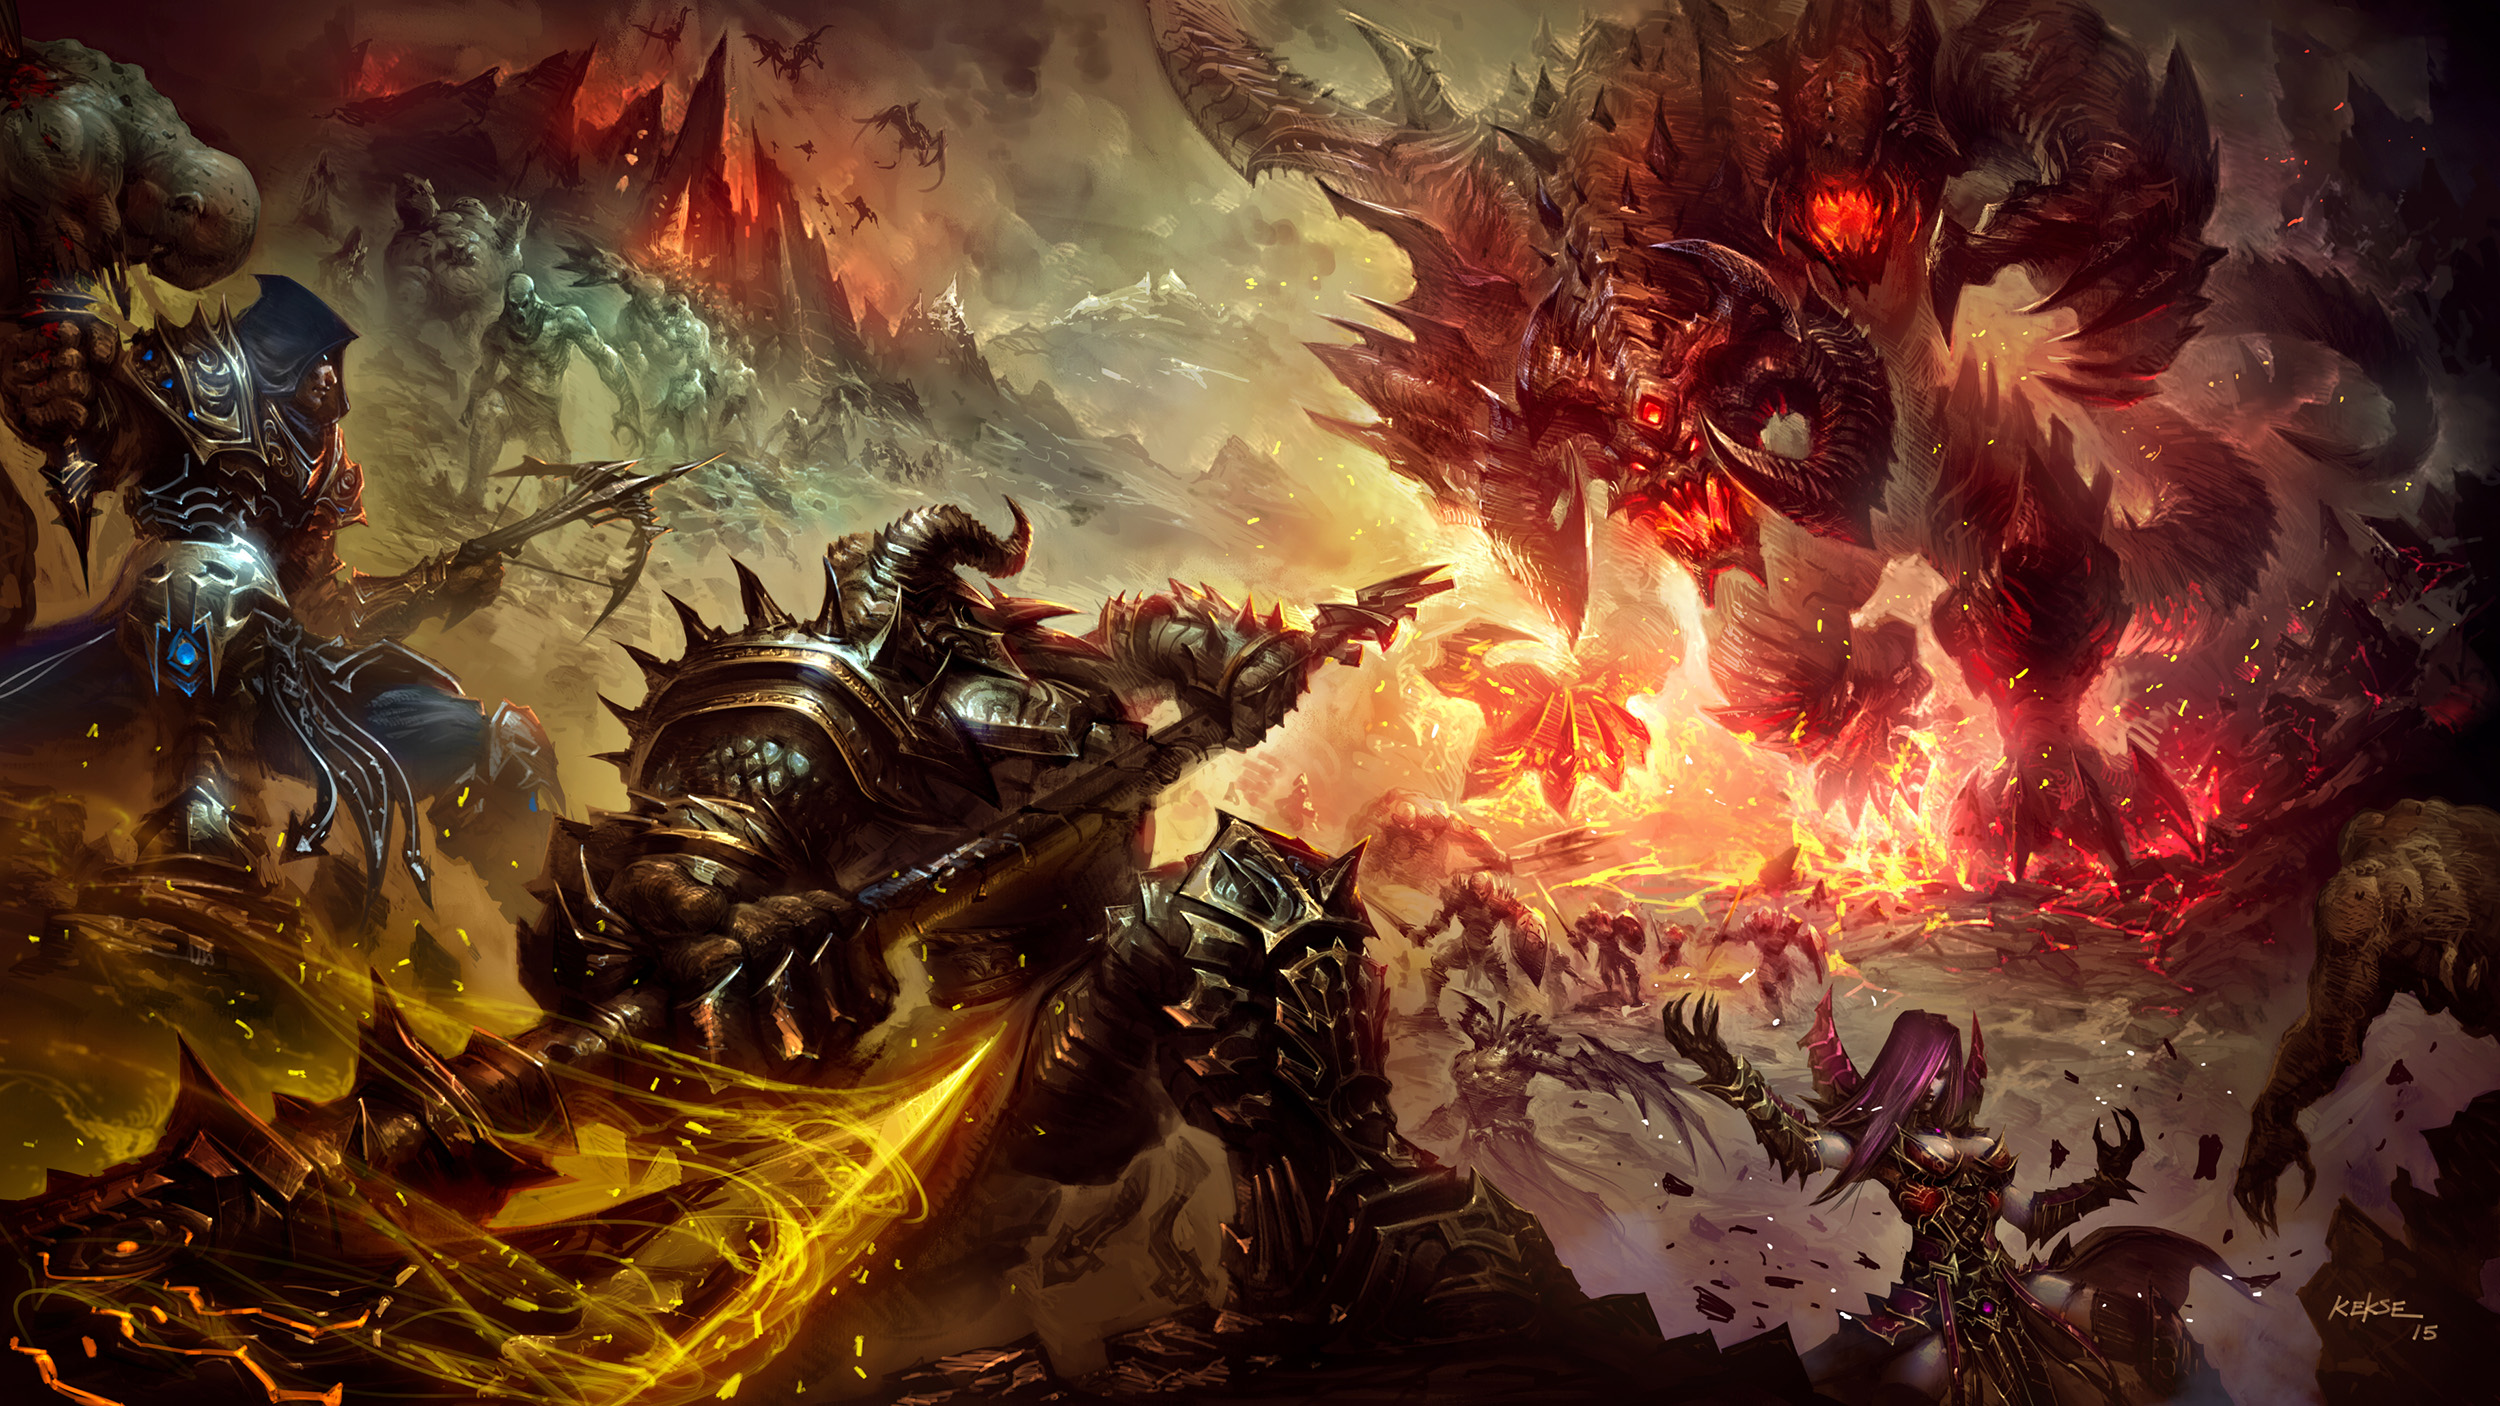 heroes of the storm wallpaper 1920x1080,action adventure game,strategy video game,cg artwork,demon,pc game